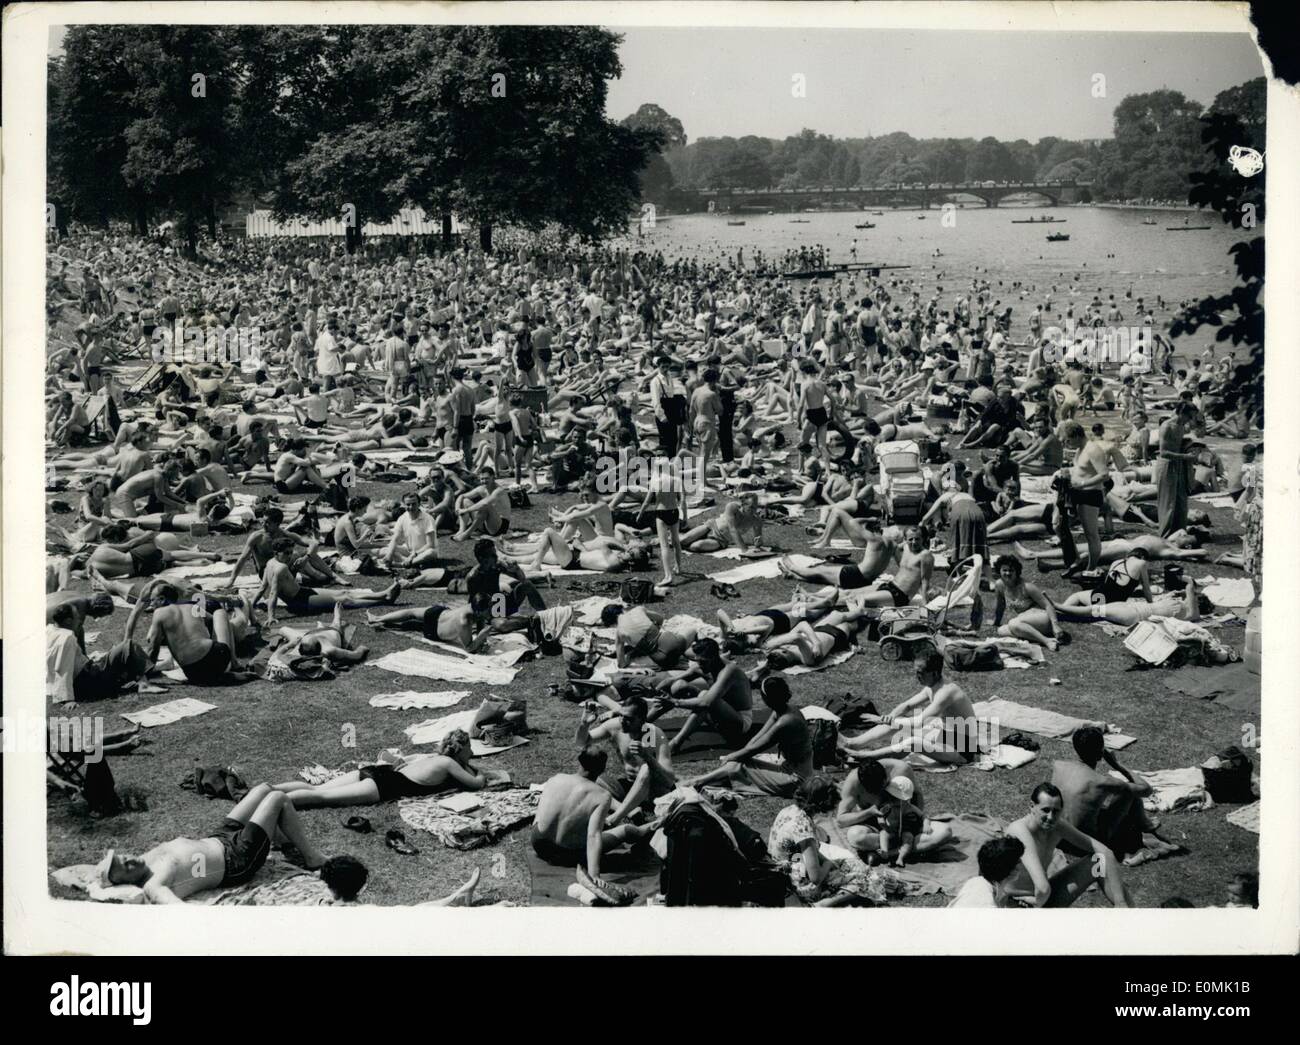 Jul. 07, 1955 - Hundreds Flock To Hyde Park Lido To Make The Most Of The Heat-Wave. Photo shows Part of the huge crowd at London's Hyde Park Lido where they took advantage of the heat-wave to do a spot of sunbathing. Stock Photo